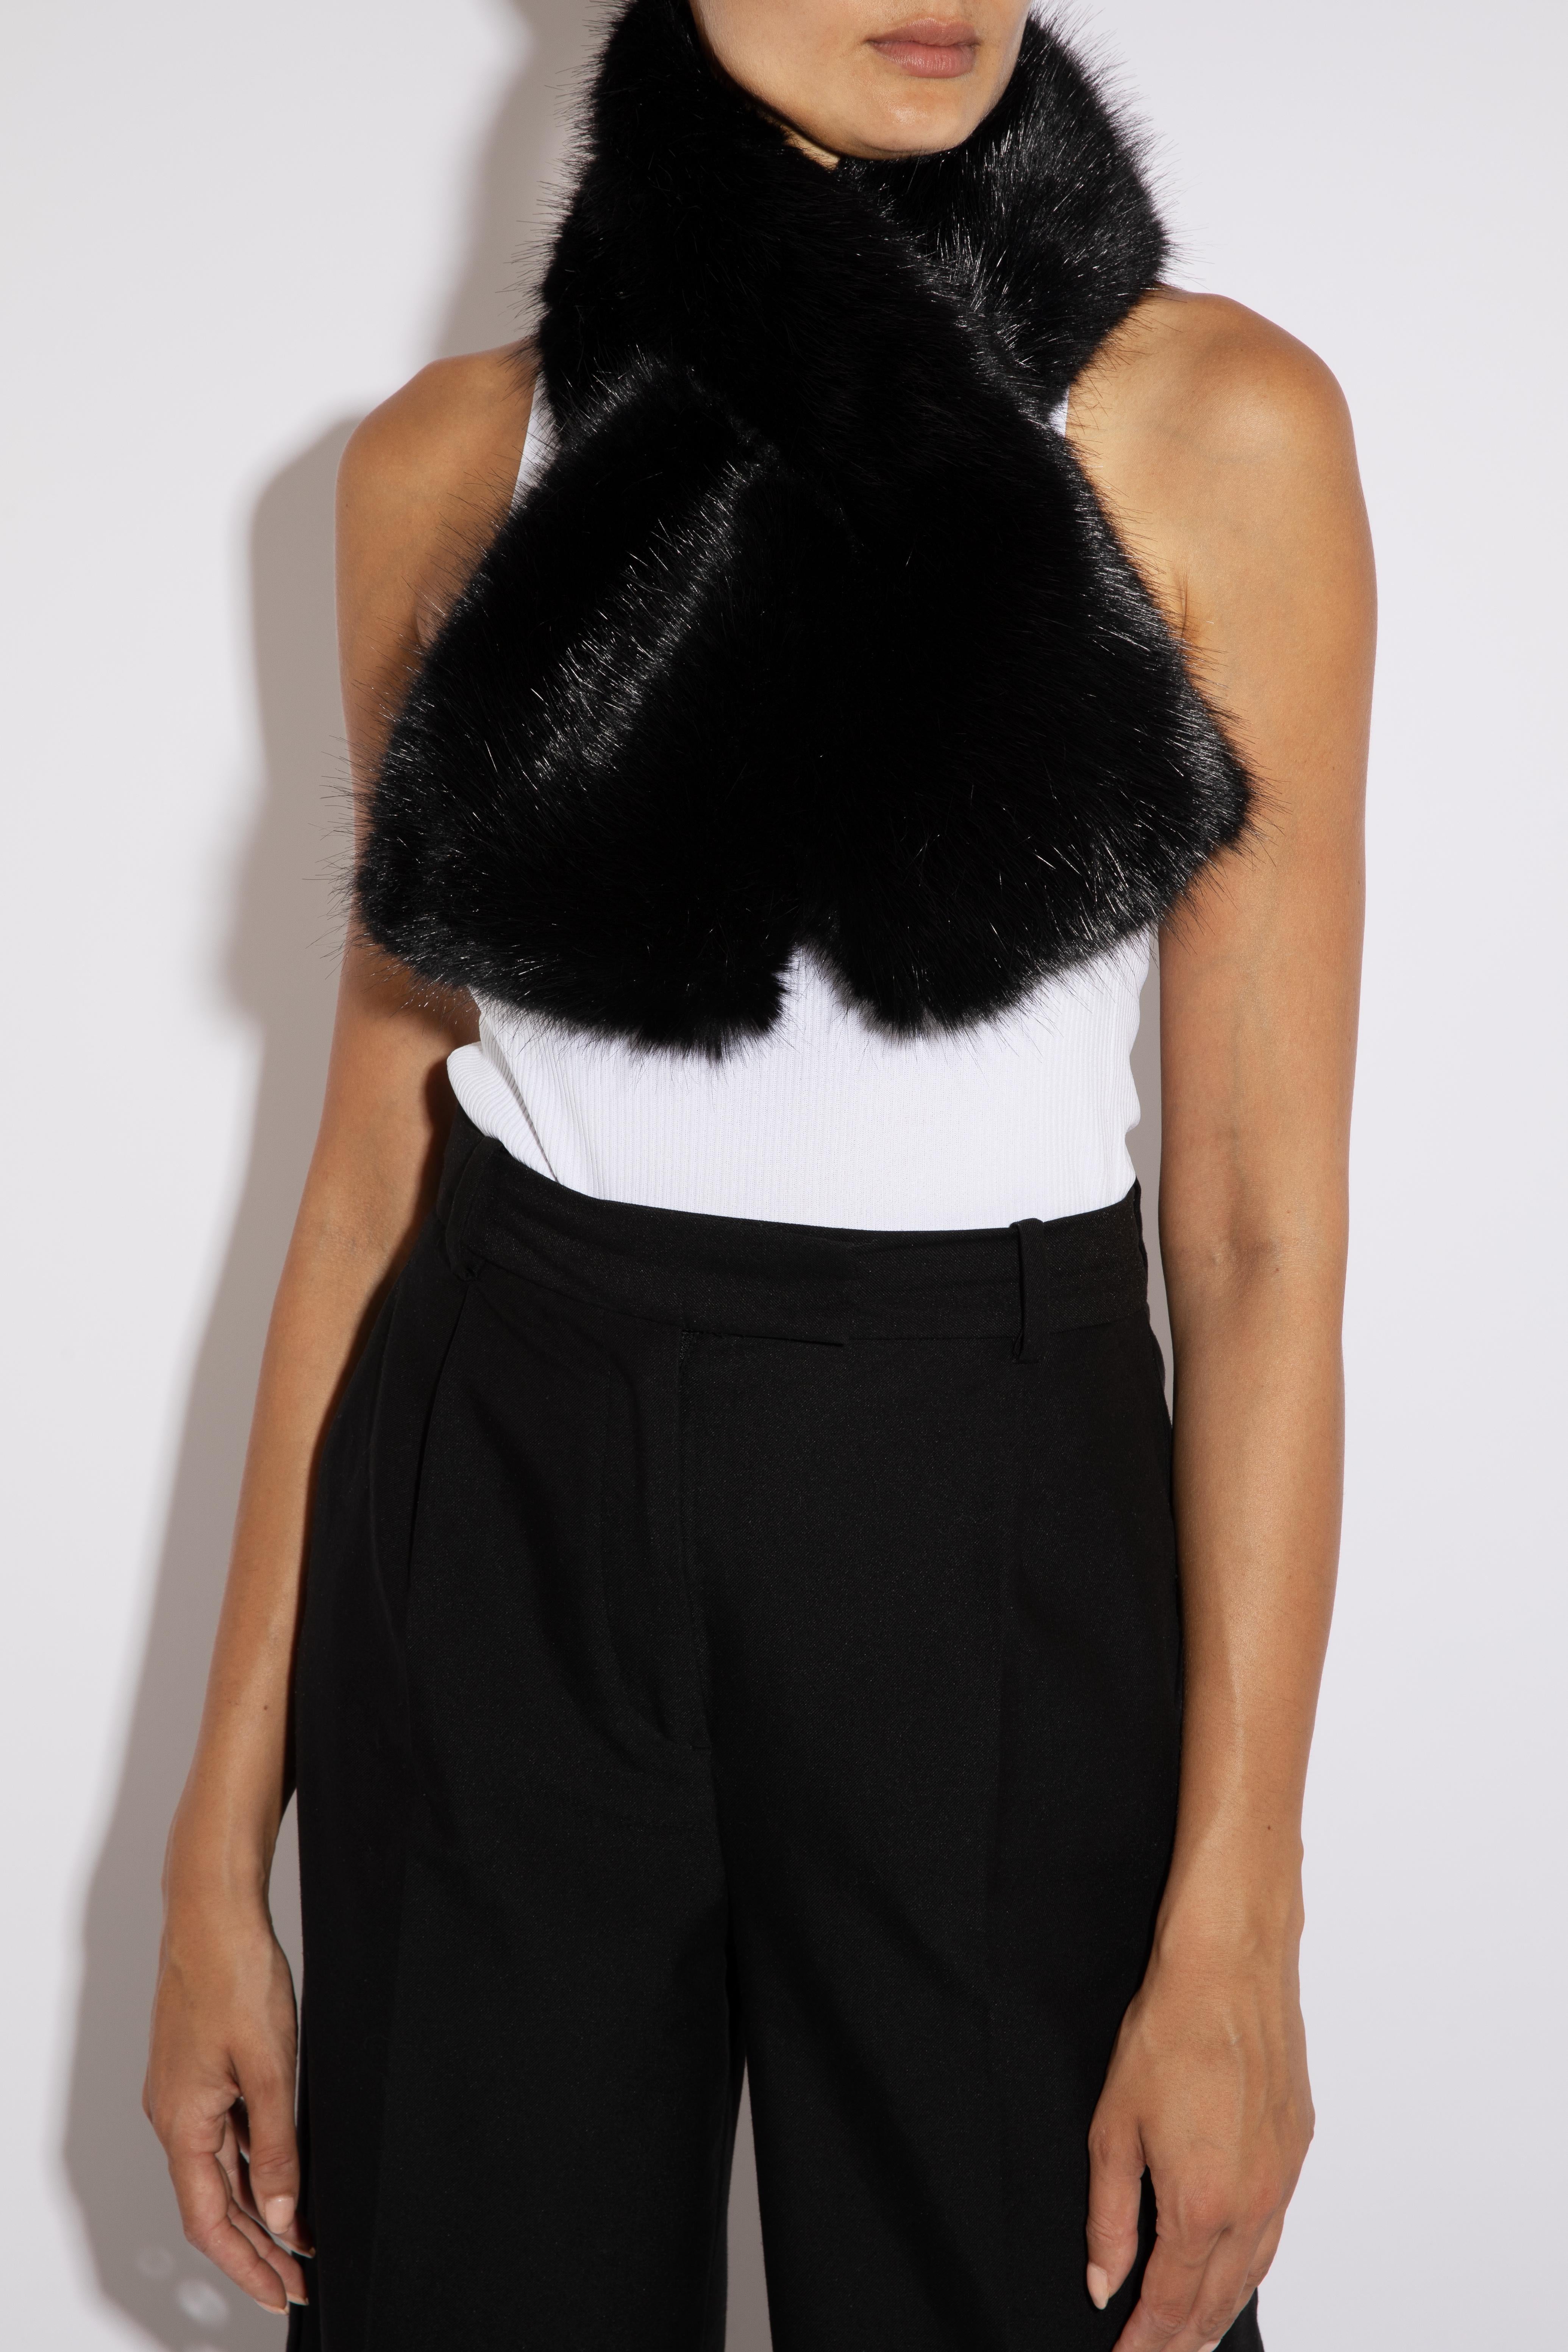 Cross-through Faux Fur Collar in Black

Details and Care:
Colour: Black
Luxurious Faux Fur
lined in 100% Acetate Satin
Special dry clean

Size and Fit:
Size fits all
Ties with hook and eyes